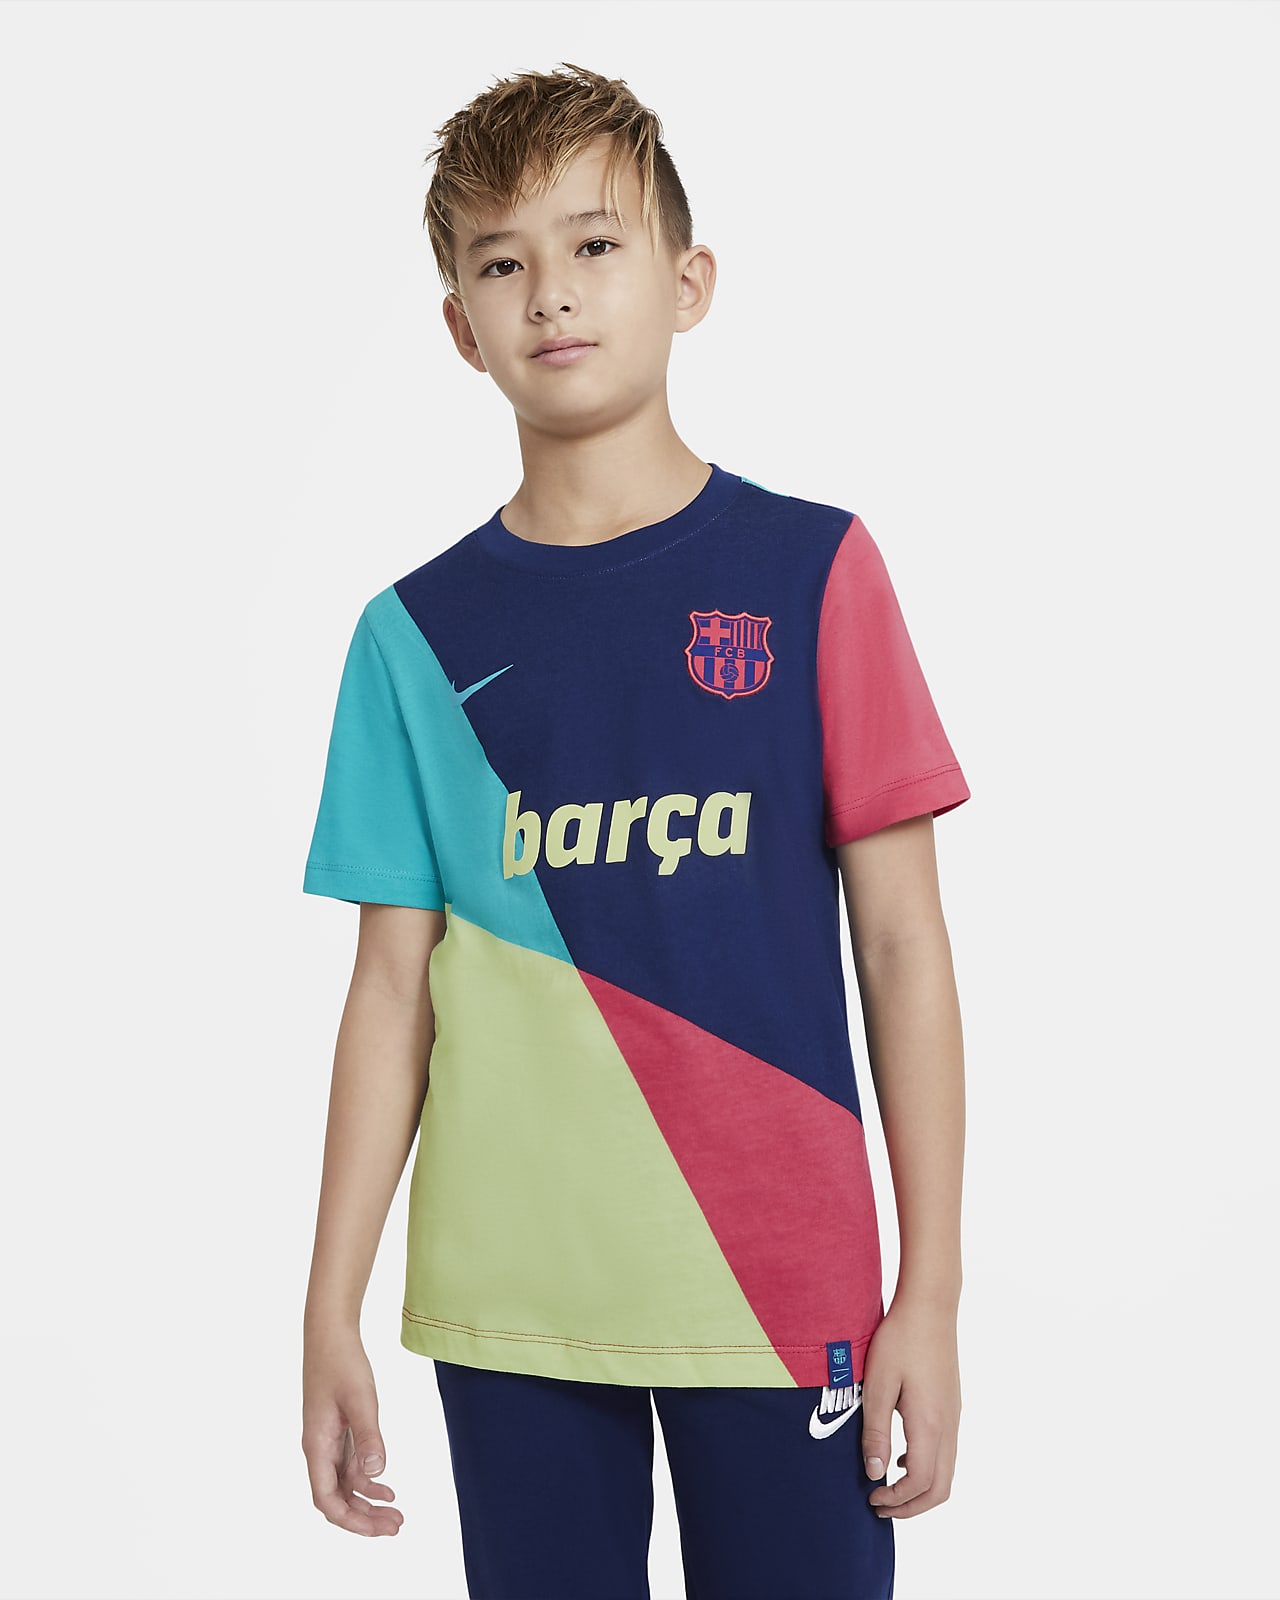 Claret FC Barcelona Official Kid/'s Club Poly T-Shirt New 10-11 Years